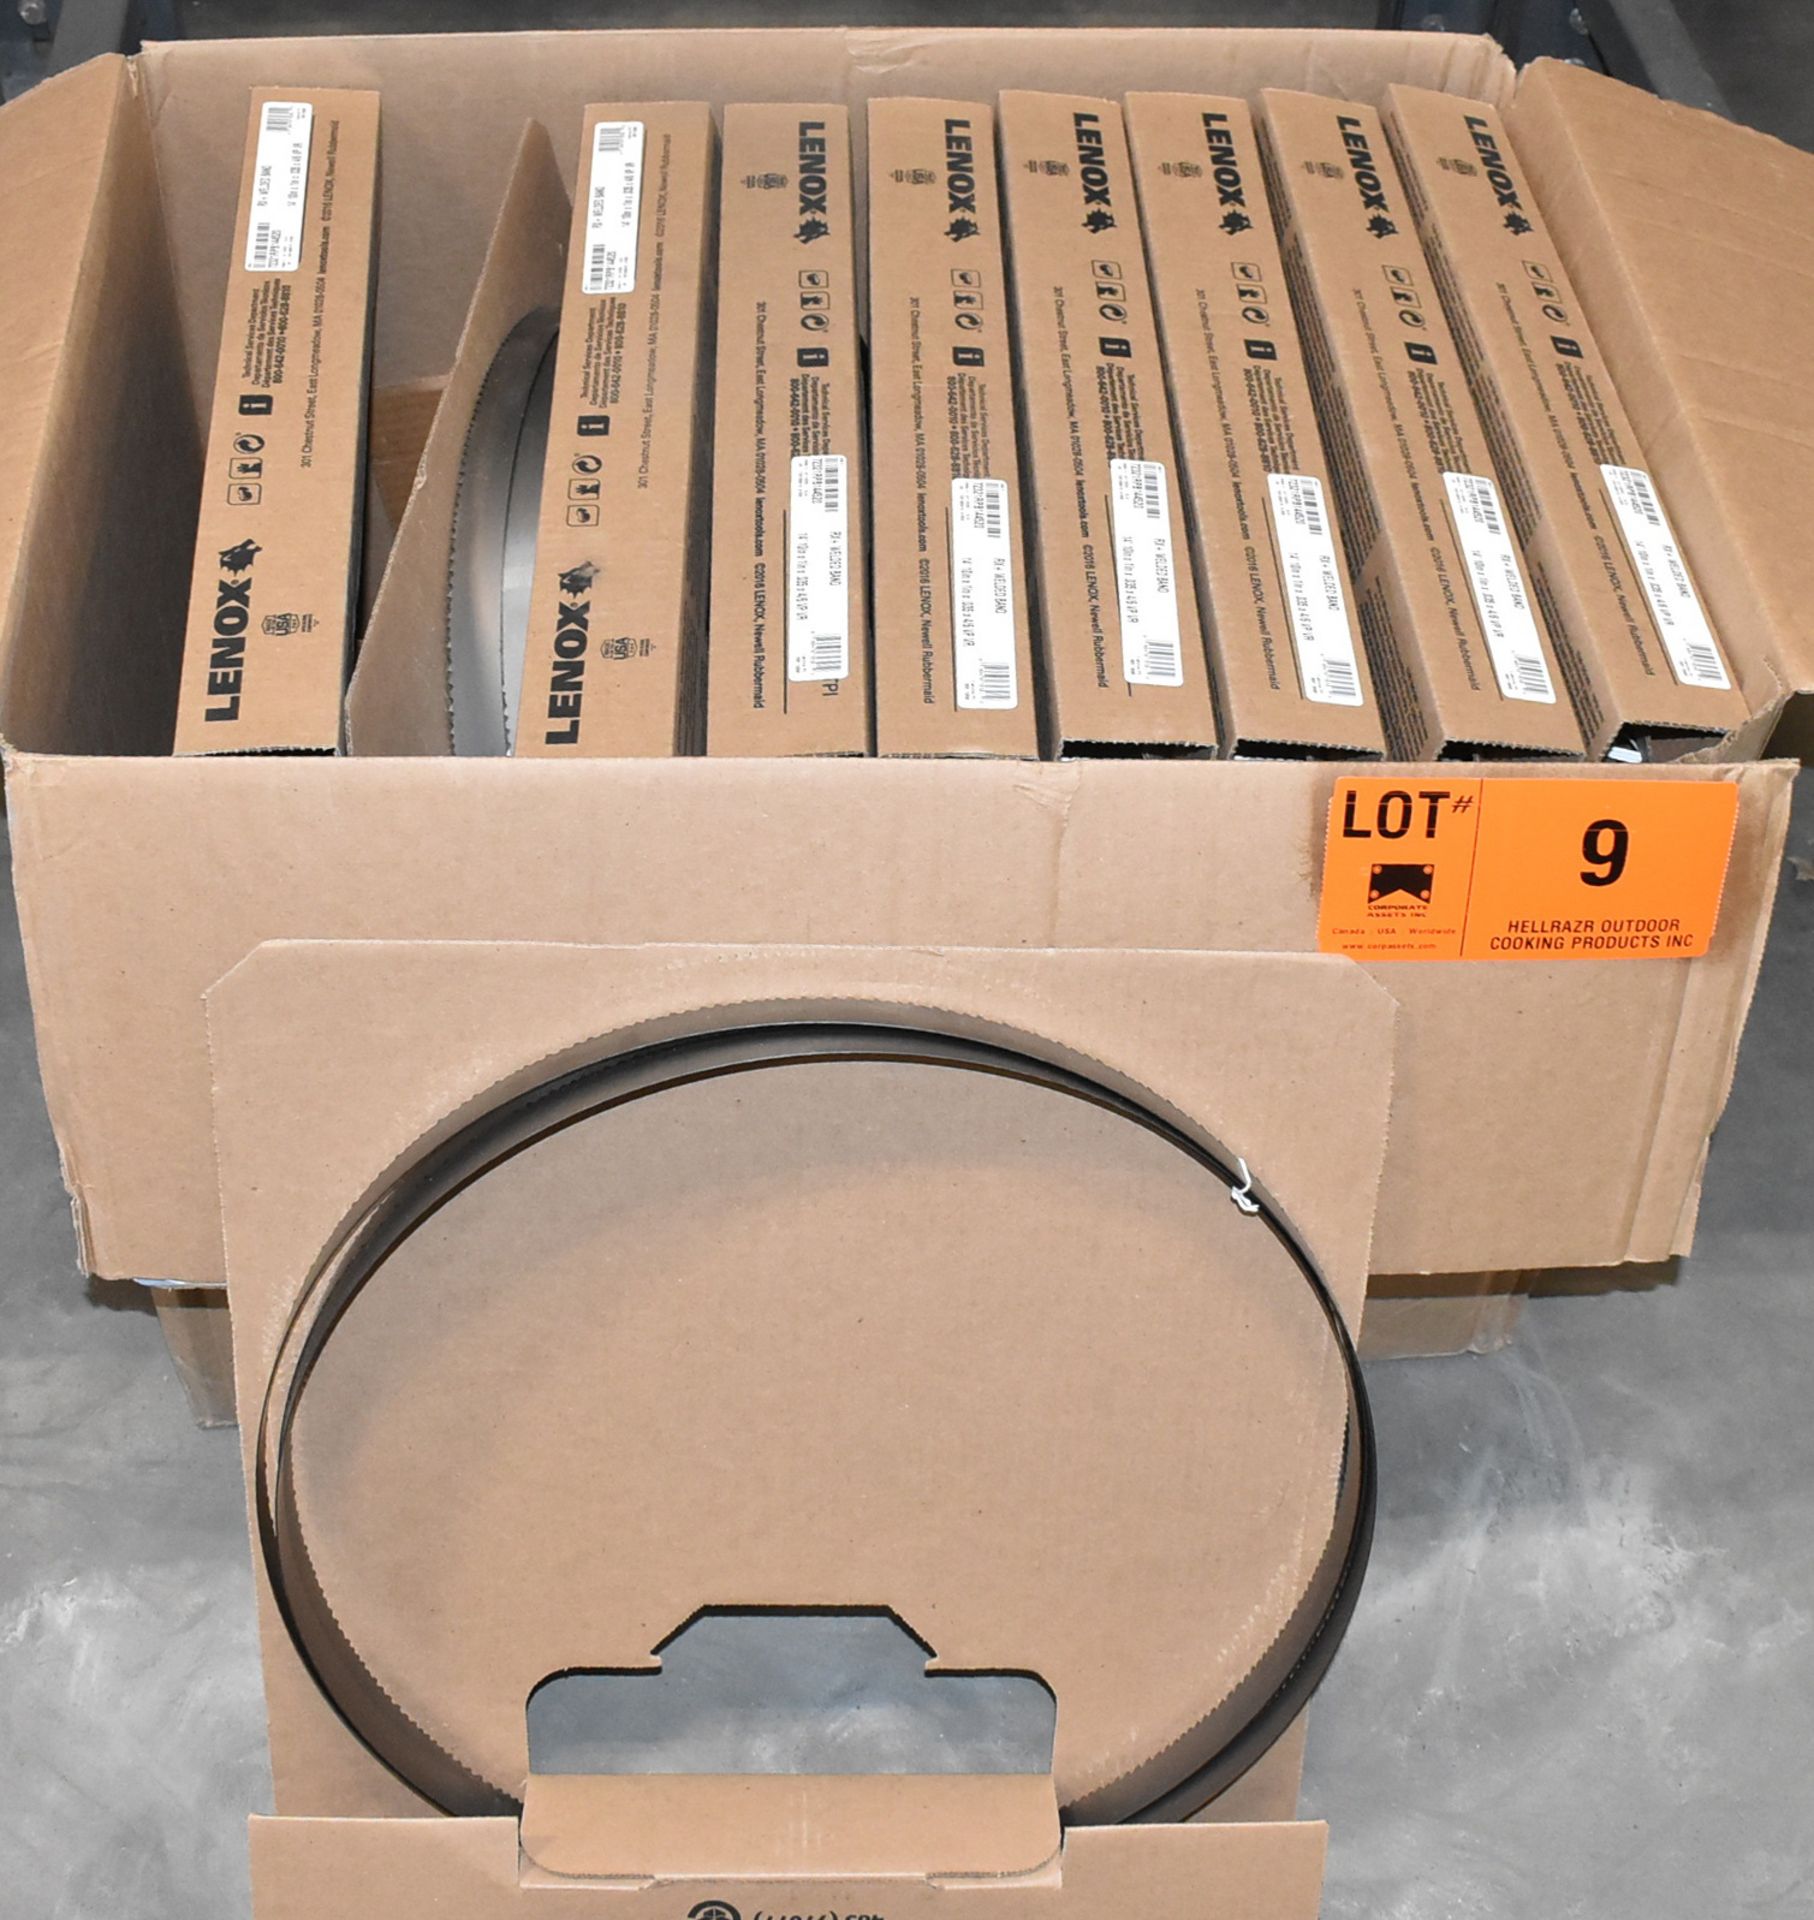 LOT/ LENNOX RX+ WELDED BAND 14'10"X1"X0.035X4/6 VP VR BAND SAW BLADES (NEW IN BOX)